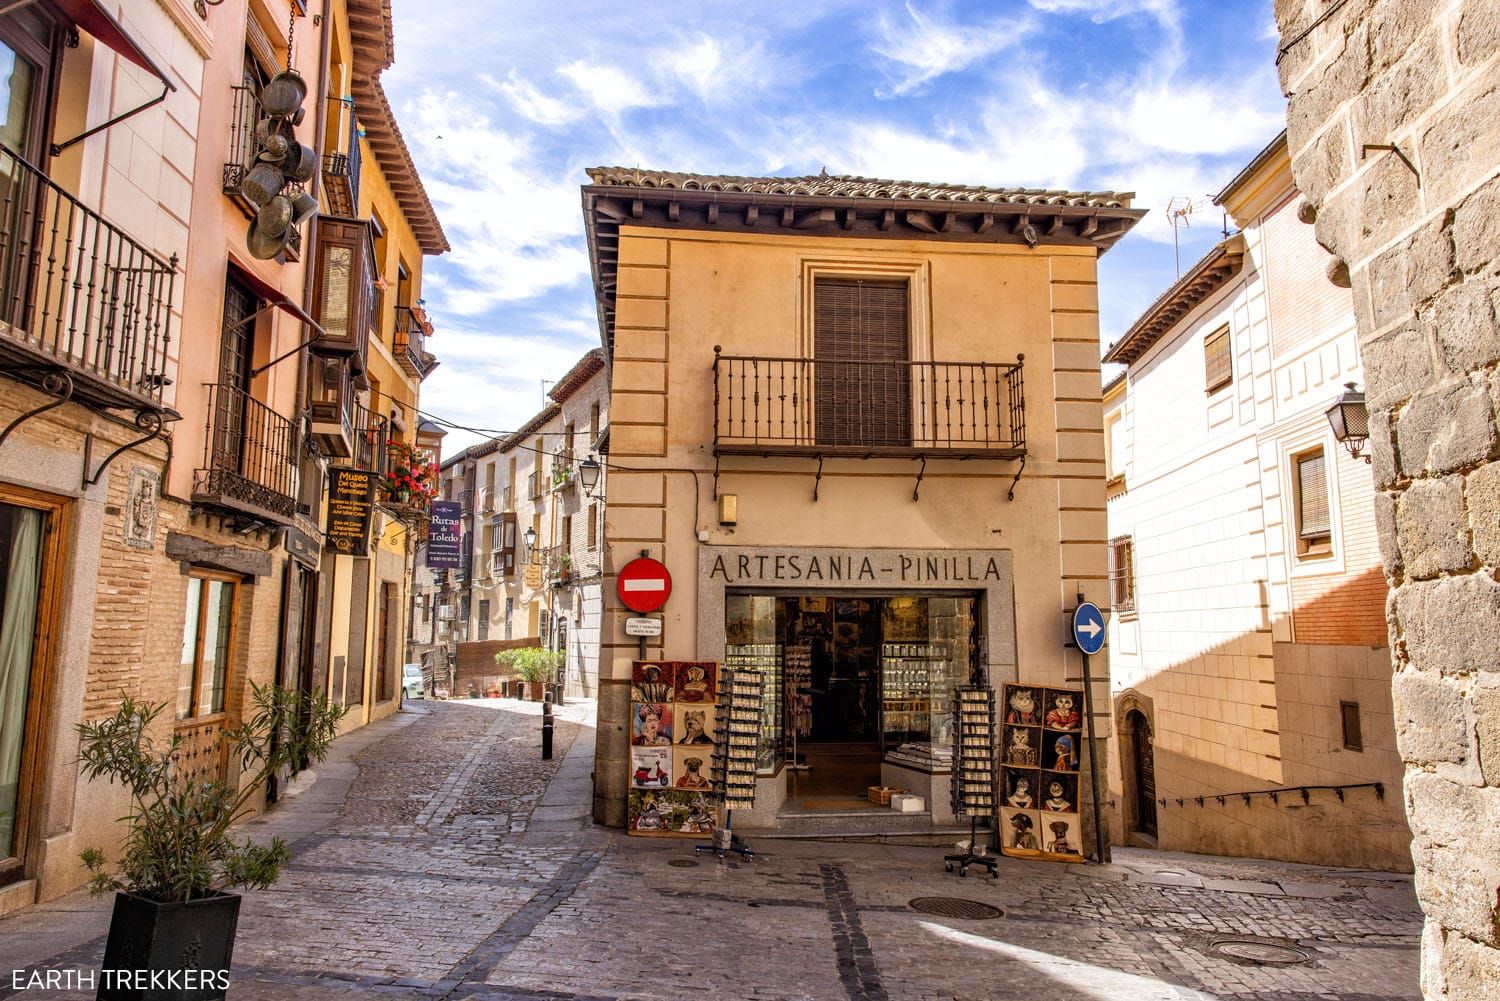 Things to Do in Toledo Spain